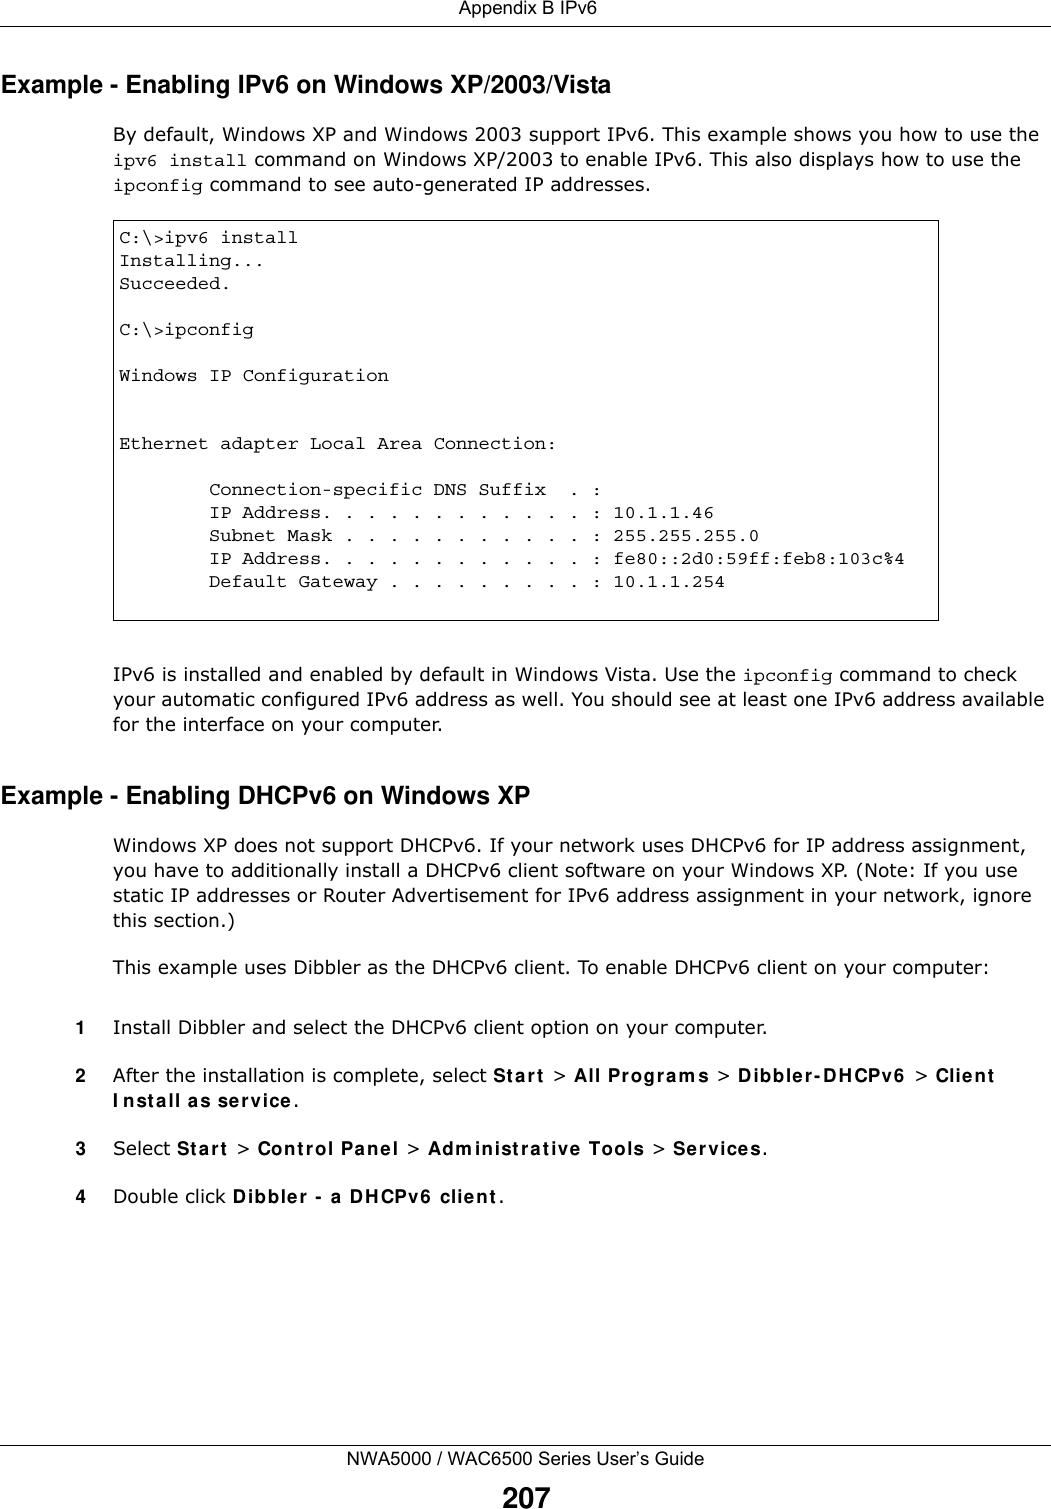  Appendix B IPv6NWA5000 / WAC6500 Series User’s Guide207Example - Enabling IPv6 on Windows XP/2003/VistaBy default, Windows XP and Windows 2003 support IPv6. This example shows you how to use the ipv6 install command on Windows XP/2003 to enable IPv6. This also displays how to use the ipconfig command to see auto-generated IP addresses.IPv6 is installed and enabled by default in Windows Vista. Use the ipconfig command to check your automatic configured IPv6 address as well. You should see at least one IPv6 address available for the interface on your computer.Example - Enabling DHCPv6 on Windows XPWindows XP does not support DHCPv6. If your network uses DHCPv6 for IP address assignment, you have to additionally install a DHCPv6 client software on your Windows XP. (Note: If you use static IP addresses or Router Advertisement for IPv6 address assignment in your network, ignore this section.)This example uses Dibbler as the DHCPv6 client. To enable DHCPv6 client on your computer:1Install Dibbler and select the DHCPv6 client option on your computer.2After the installation is complete, select St a r t  &gt; All Pr ogra m s &gt; Dibbler - DHCPv6  &gt; Clie nt  I nst a ll as se rvice .3Select St a r t  &gt; Control Panel &gt; Adm in ist ra t ive  Tools &gt; Ser vices.4Double click D ibbler -  a D HCPv6  clie nt .C:\&gt;ipv6 installInstalling...Succeeded.C:\&gt;ipconfigWindows IP ConfigurationEthernet adapter Local Area Connection:        Connection-specific DNS Suffix  . :         IP Address. . . . . . . . . . . . : 10.1.1.46        Subnet Mask . . . . . . . . . . . : 255.255.255.0        IP Address. . . . . . . . . . . . : fe80::2d0:59ff:feb8:103c%4        Default Gateway . . . . . . . . . : 10.1.1.254